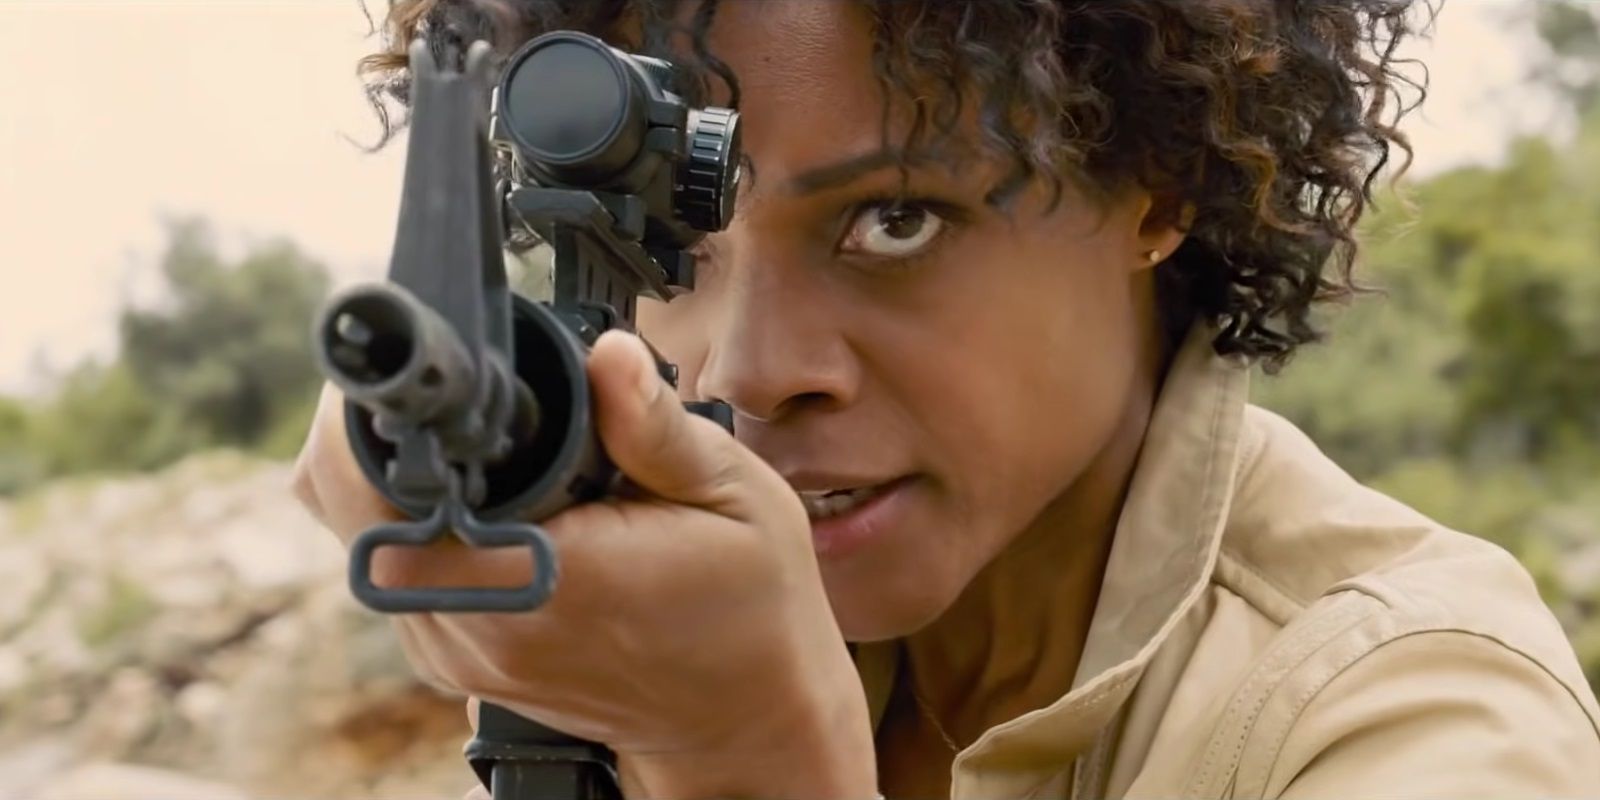 Moneypenny with a sniper rifle in Skyfall